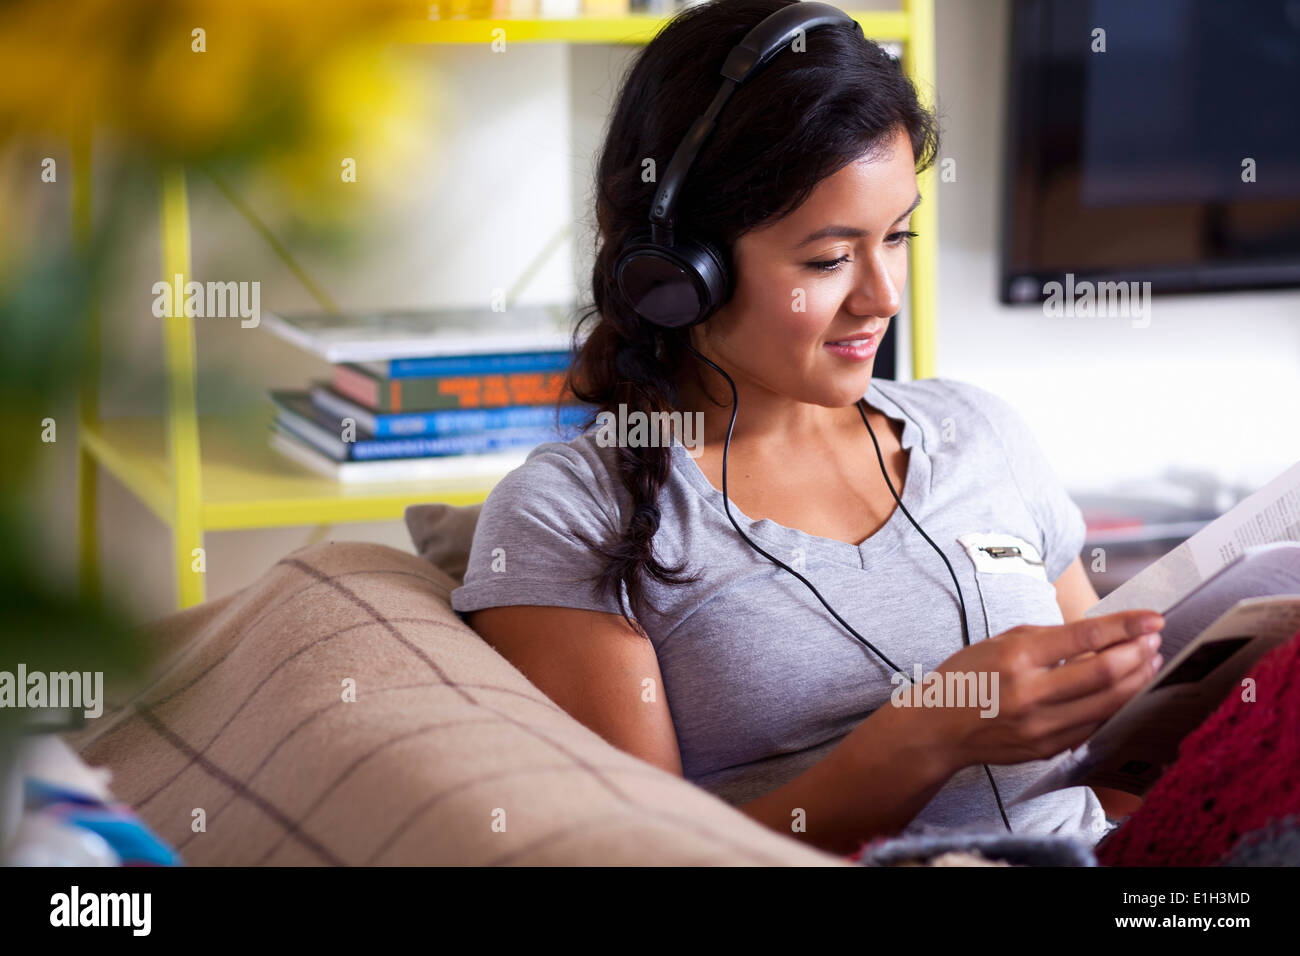 Young woman reading and listening to music Stock Photo